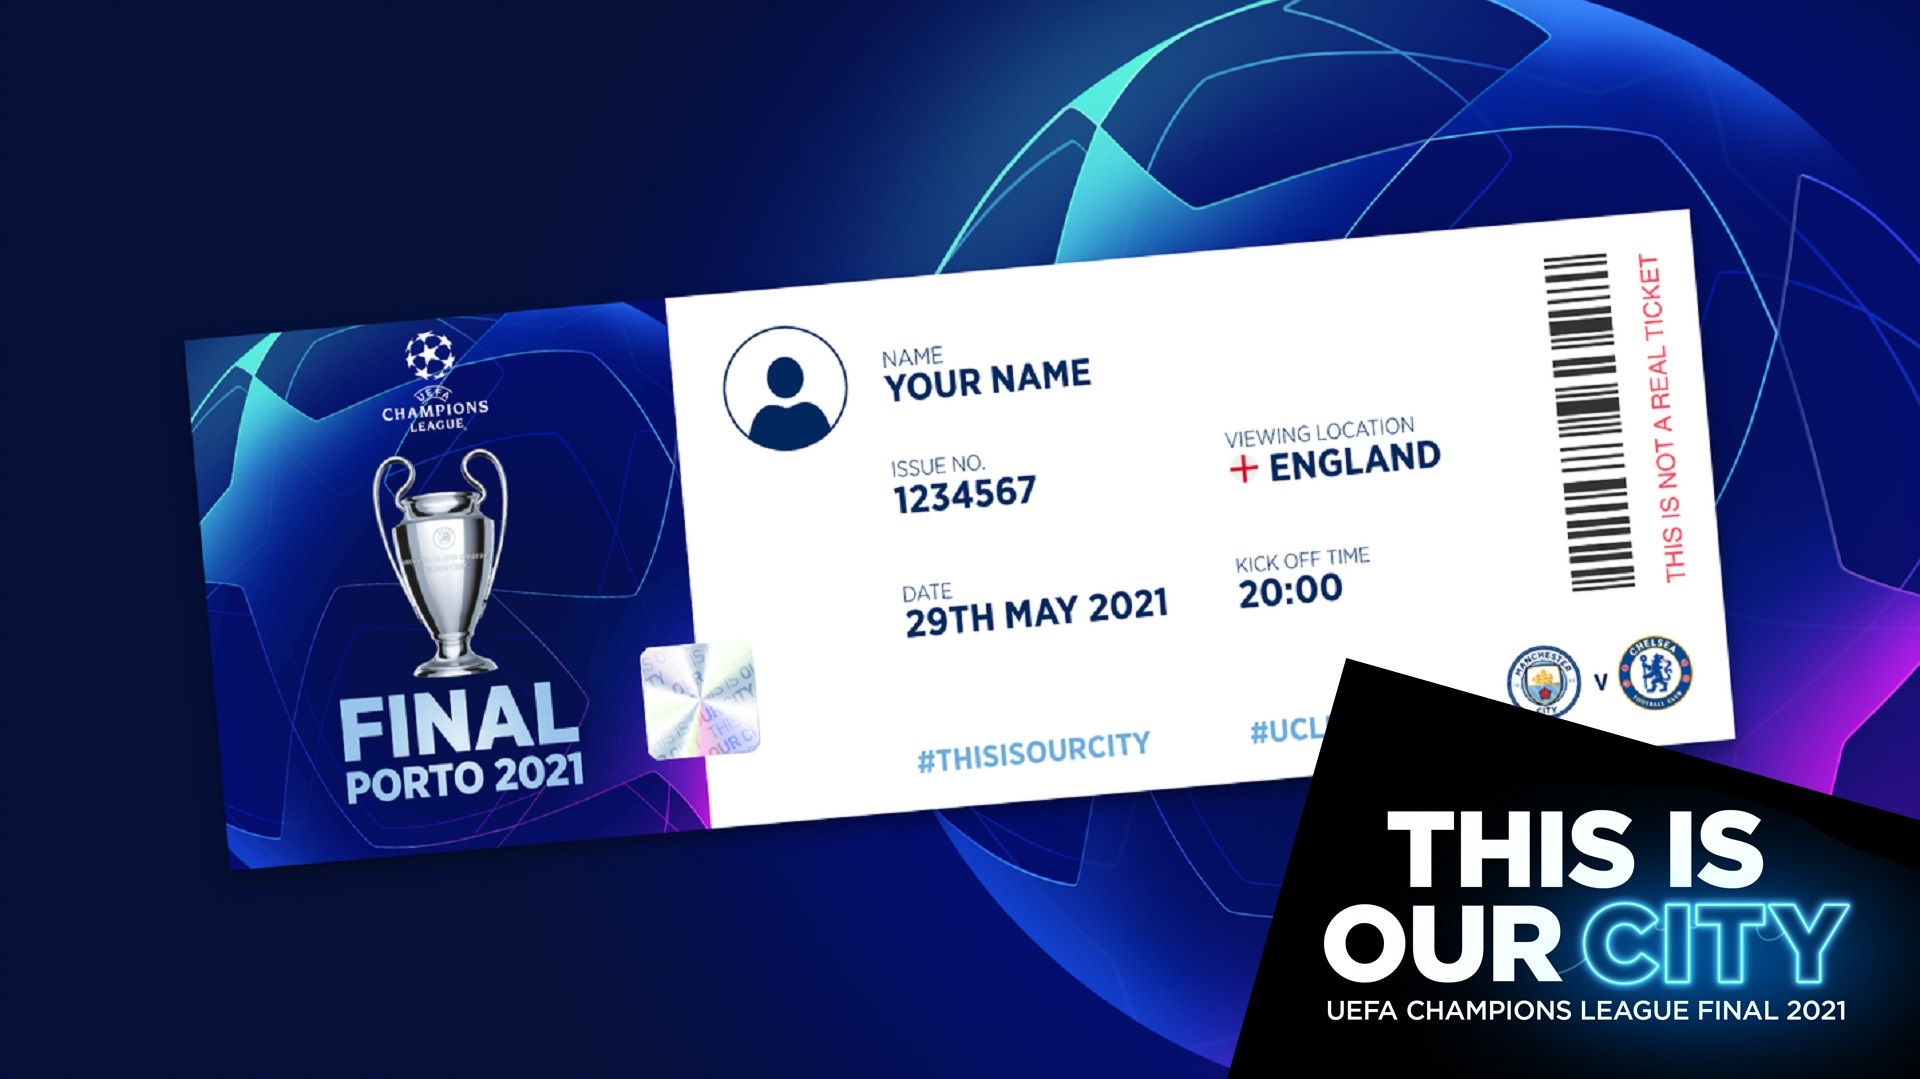 Claim your commemorative virtual ticket for the Champions League final!